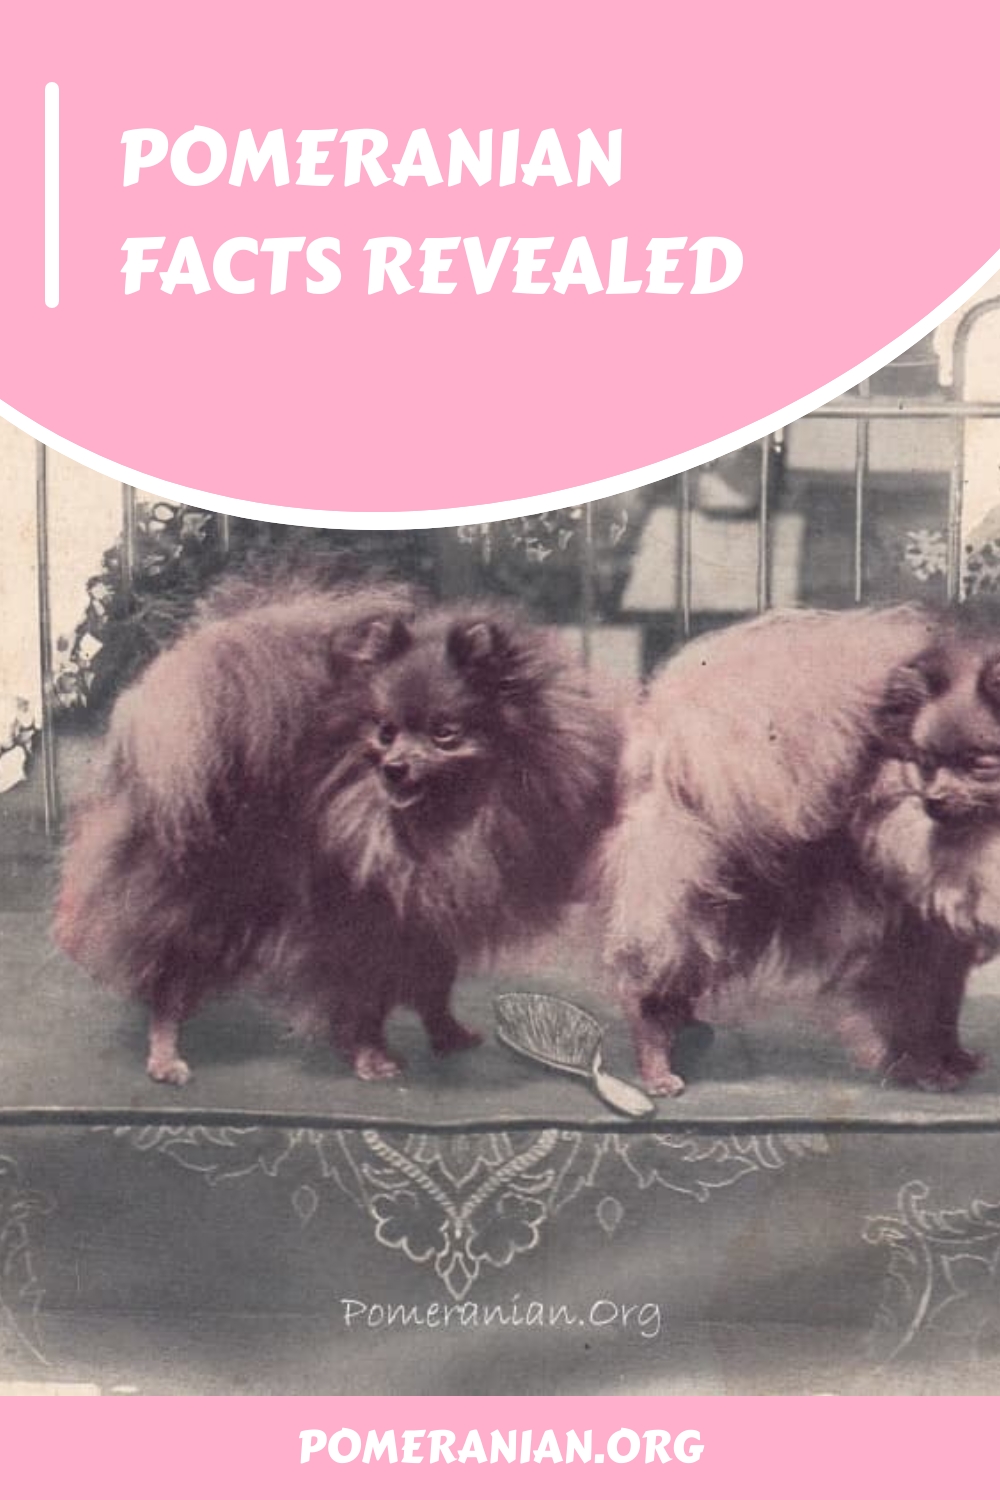 Pomeranian Facts, Characteristics, and Information Revealed